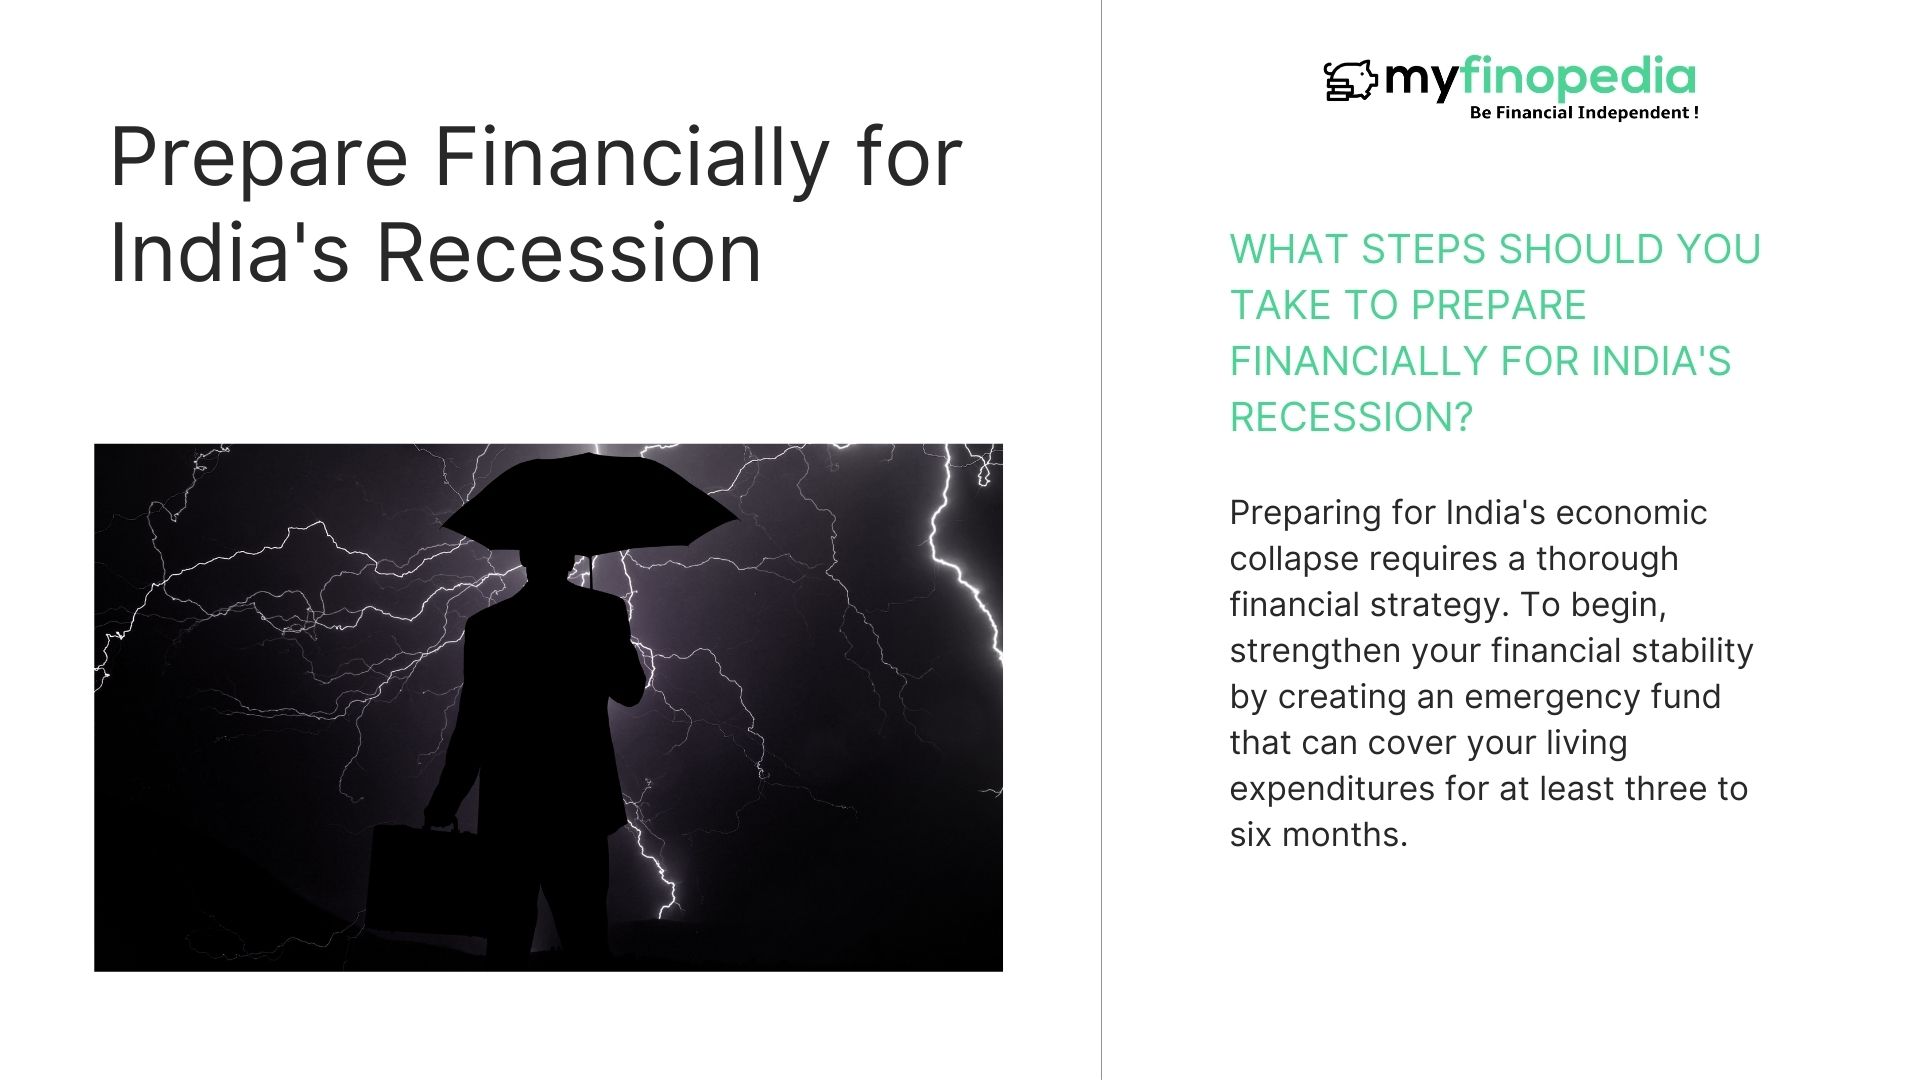 What Steps Should You Take to Prepare Financially for India's Recession?